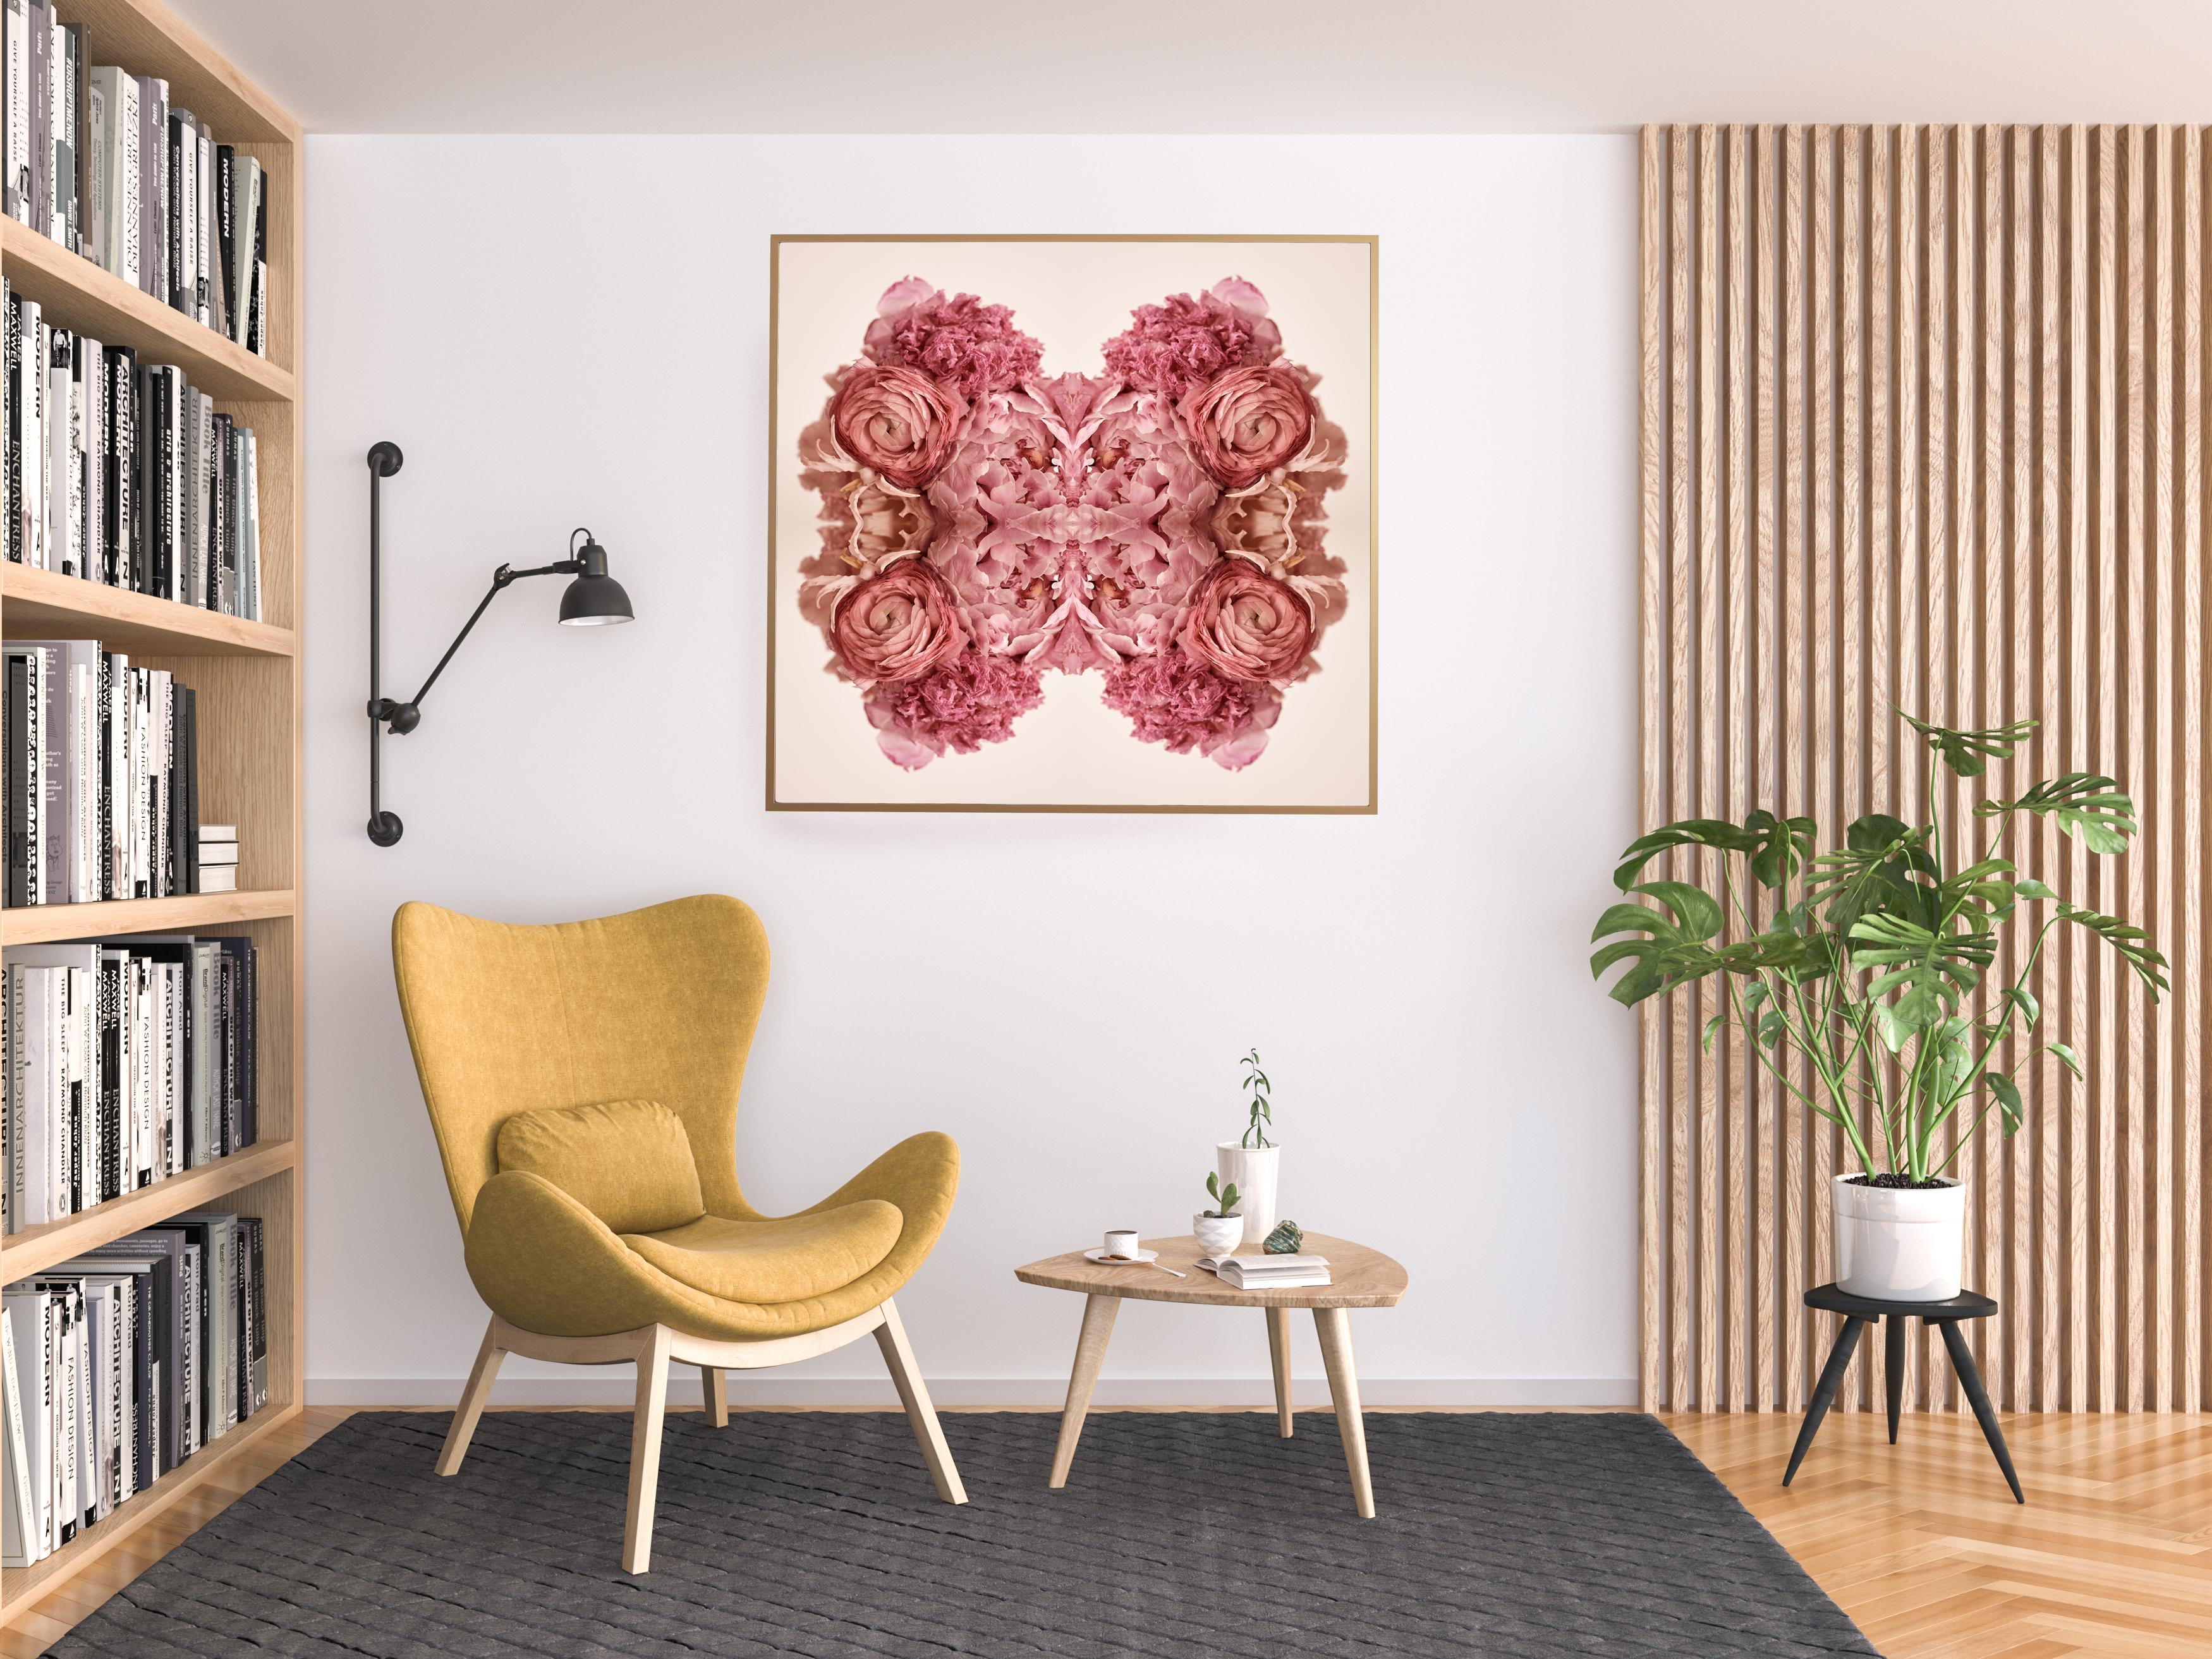 This print features the playful relationship between natural forms and botanicals. In this image Erin uses the natural composition of the pink flowers, and her own collage work, to create a hypnotic mandala with the floral. Some describe it as a